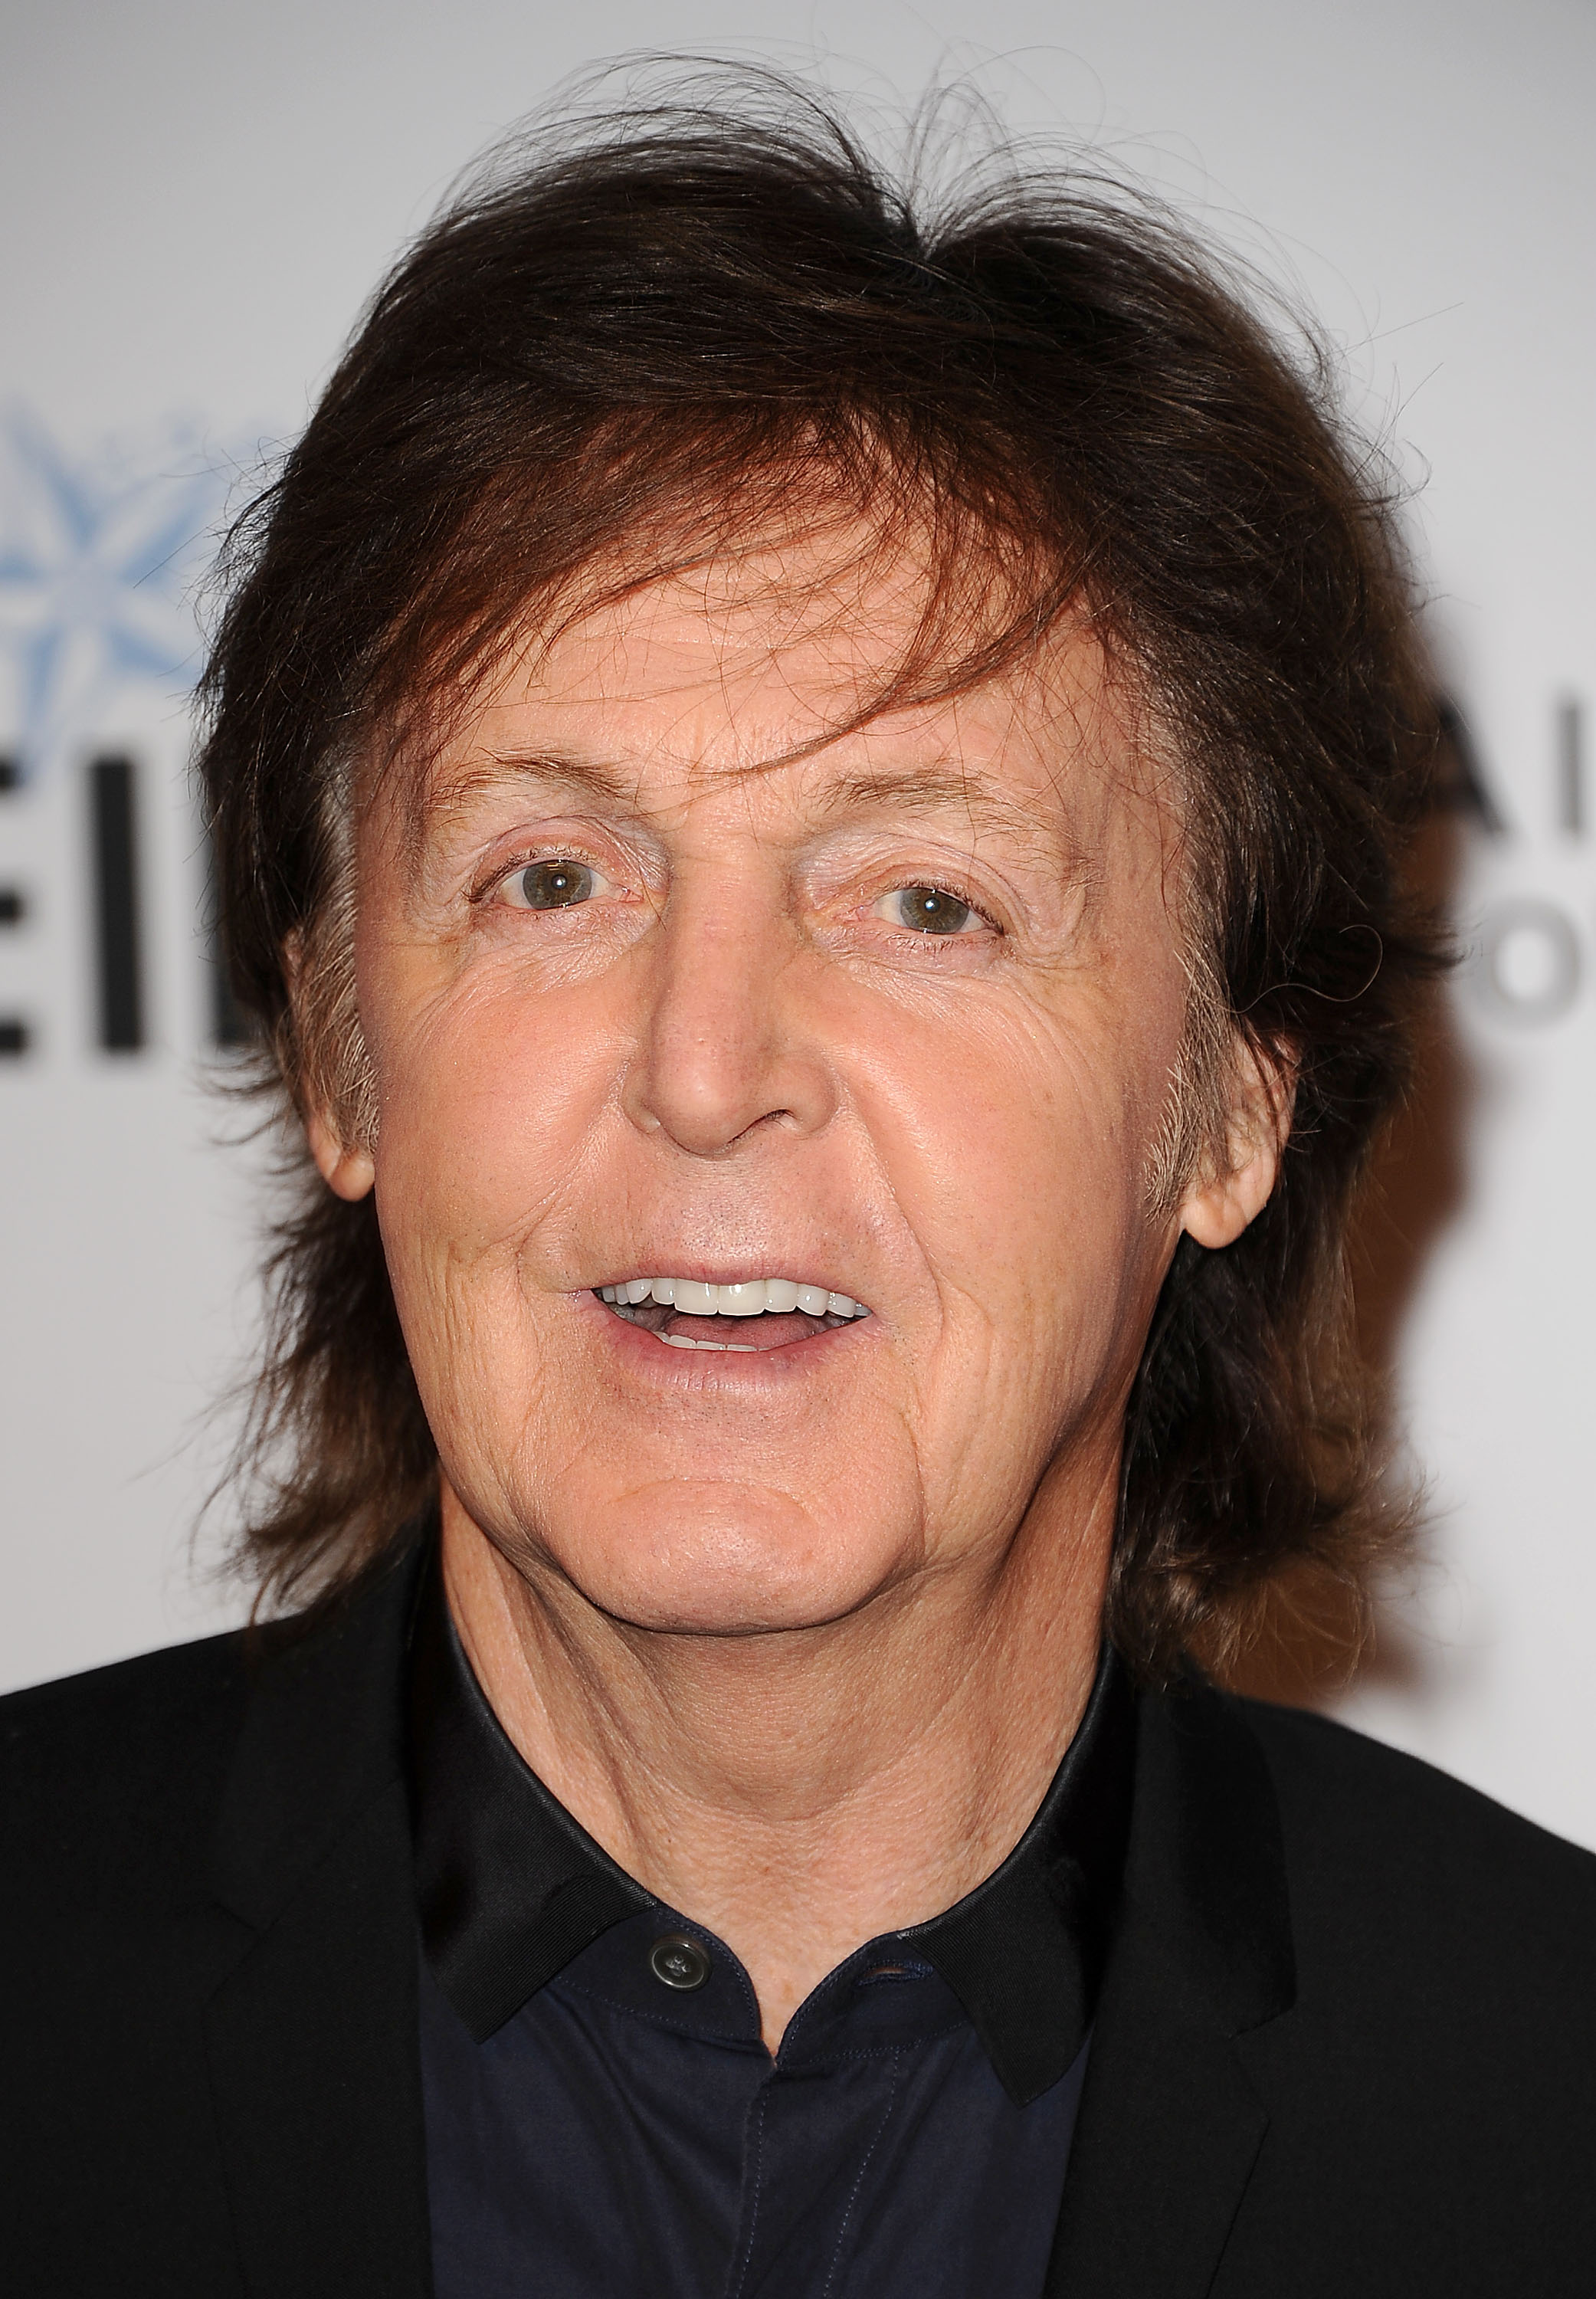 Paul McCartney at the 23rd annual Simply Shakespeare benefit reading of "The Two Gentlemen of Verona" in California, 2013 | Source: Getty Images